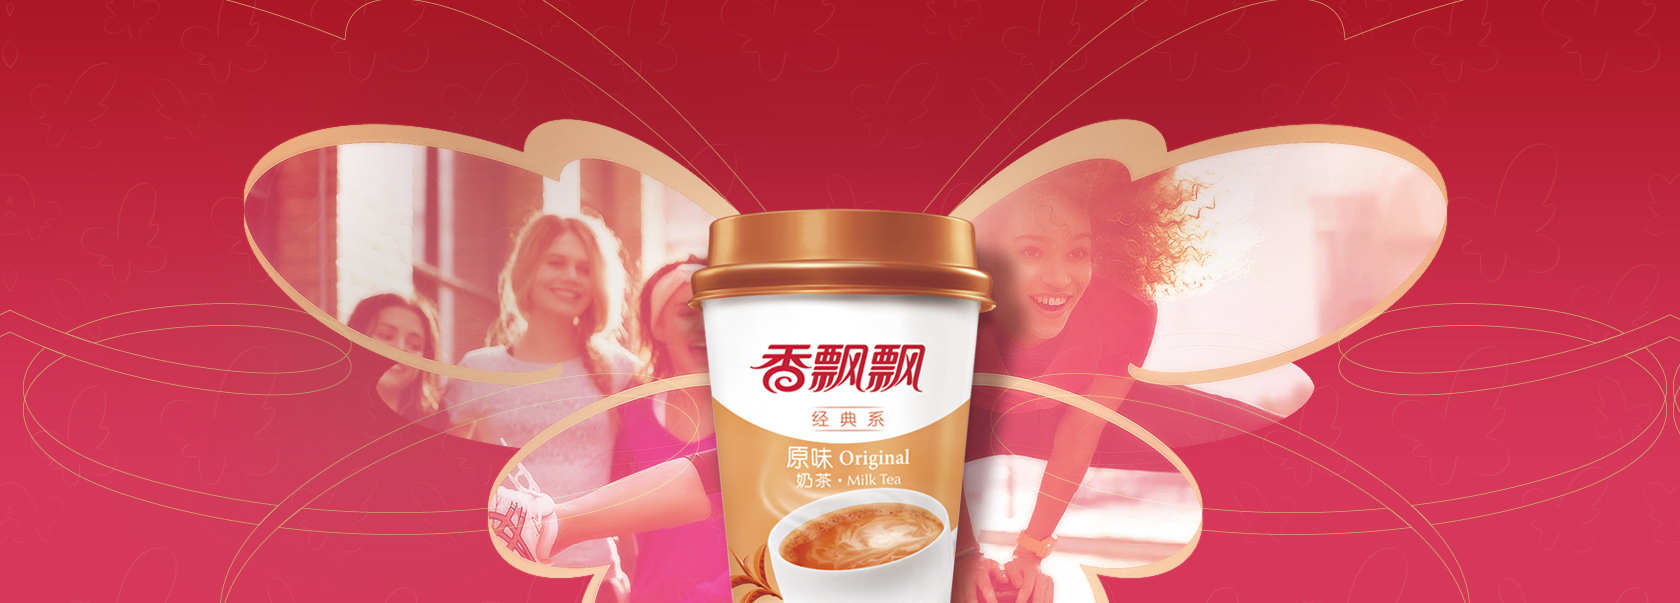 XiangPiaoPiao:Instant Milk Tea Giant Company in Transition